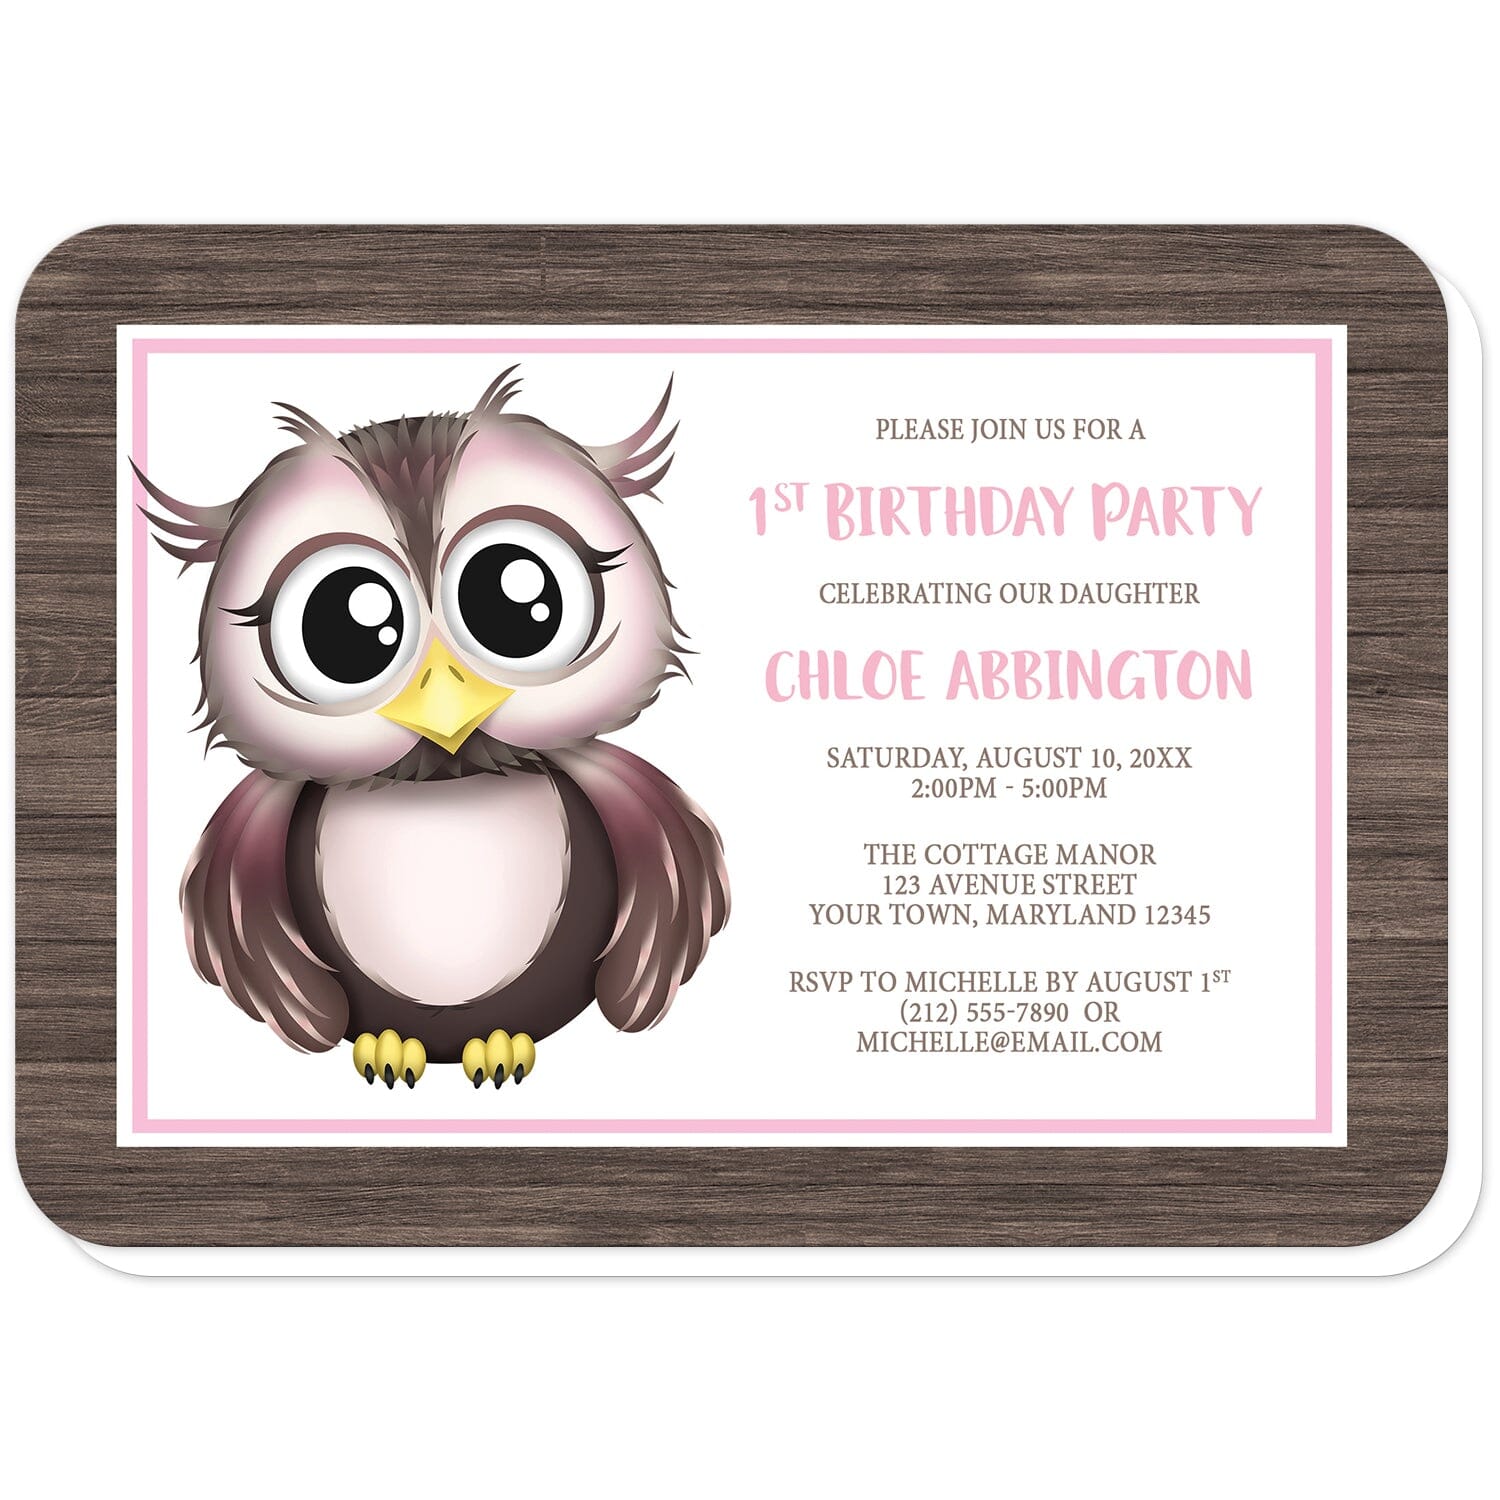 Adorable Owl Pink and Brown Birthday Party Invitations (with rounded corners) at Artistically Invited. Adorable owl pink and brown birthday party invitations for a 1st birthday or other year or milestone that are illustrated with a cute pink and brown owl and a rustic brown wood frame design. The personalized information you provide for your owl birthday party celebration will be printed in pink and brown over white next to the adorable owl. 